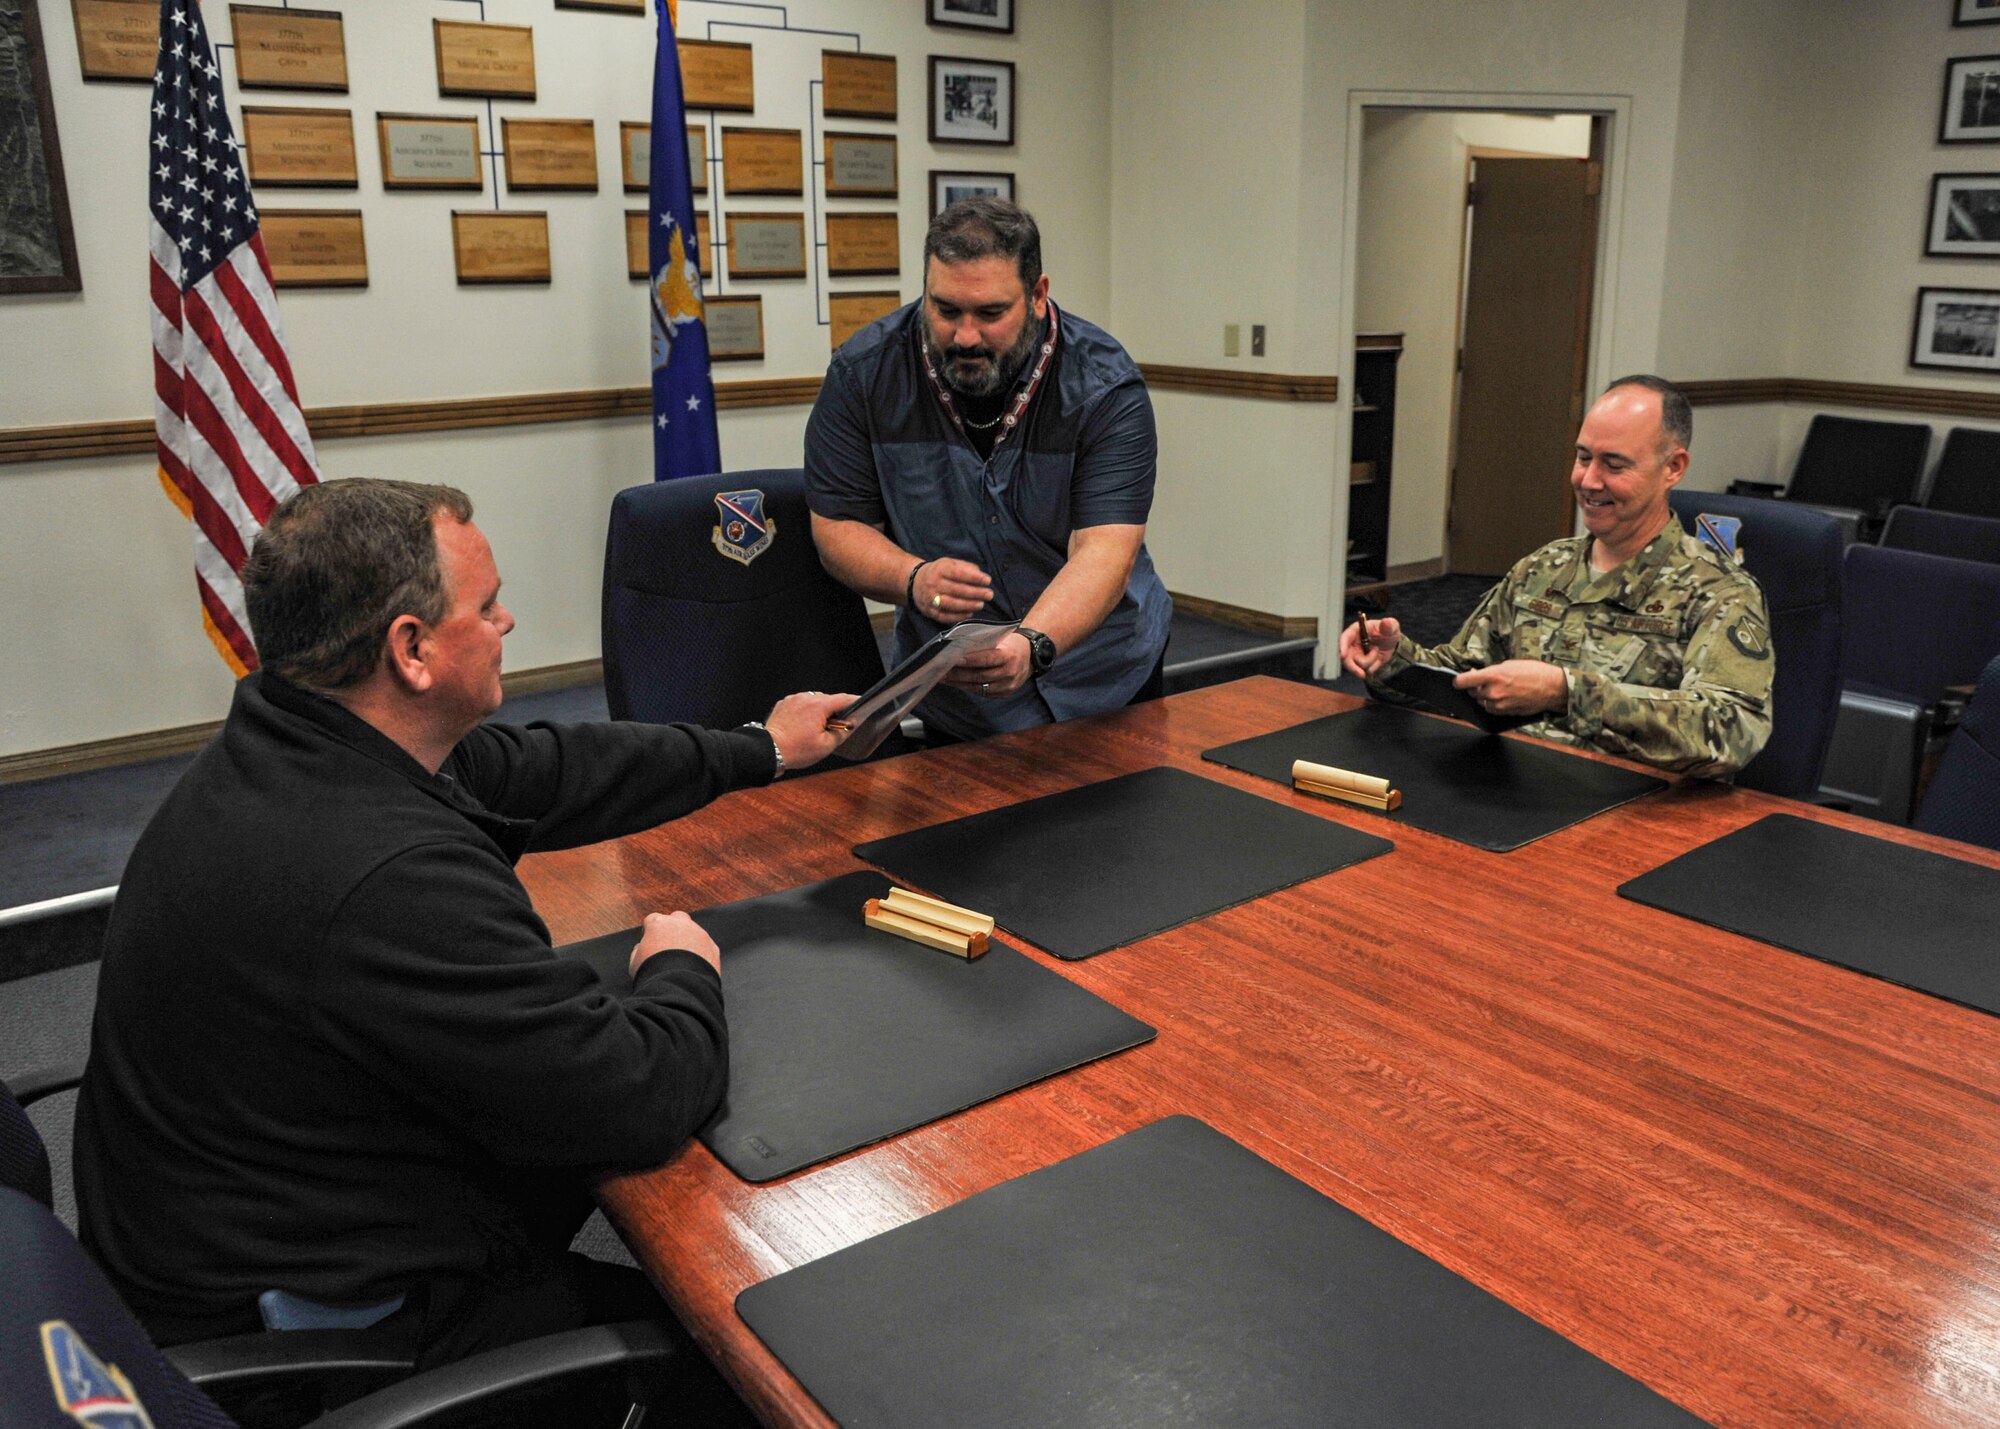 Left to right:  Tommy Hobson, president for the American Federation of Government Employees (local 2263), Steve Jansen, Kirtland's Labor Relations officer, and 377th Air Base Wing Commander Col. Richard Gibbs complete the signing of a new labor agreement Oct. 4, 2018 here. The agreement supplements the master labor agreement reached between the AFGE Council 214 and Air Force Materiel Commander in May of 2017. The new agreement runs through 2020, but can be extended in three-year increments thereafter, if both parties agree. (U.S. Air Force photo by Jim Fisher)